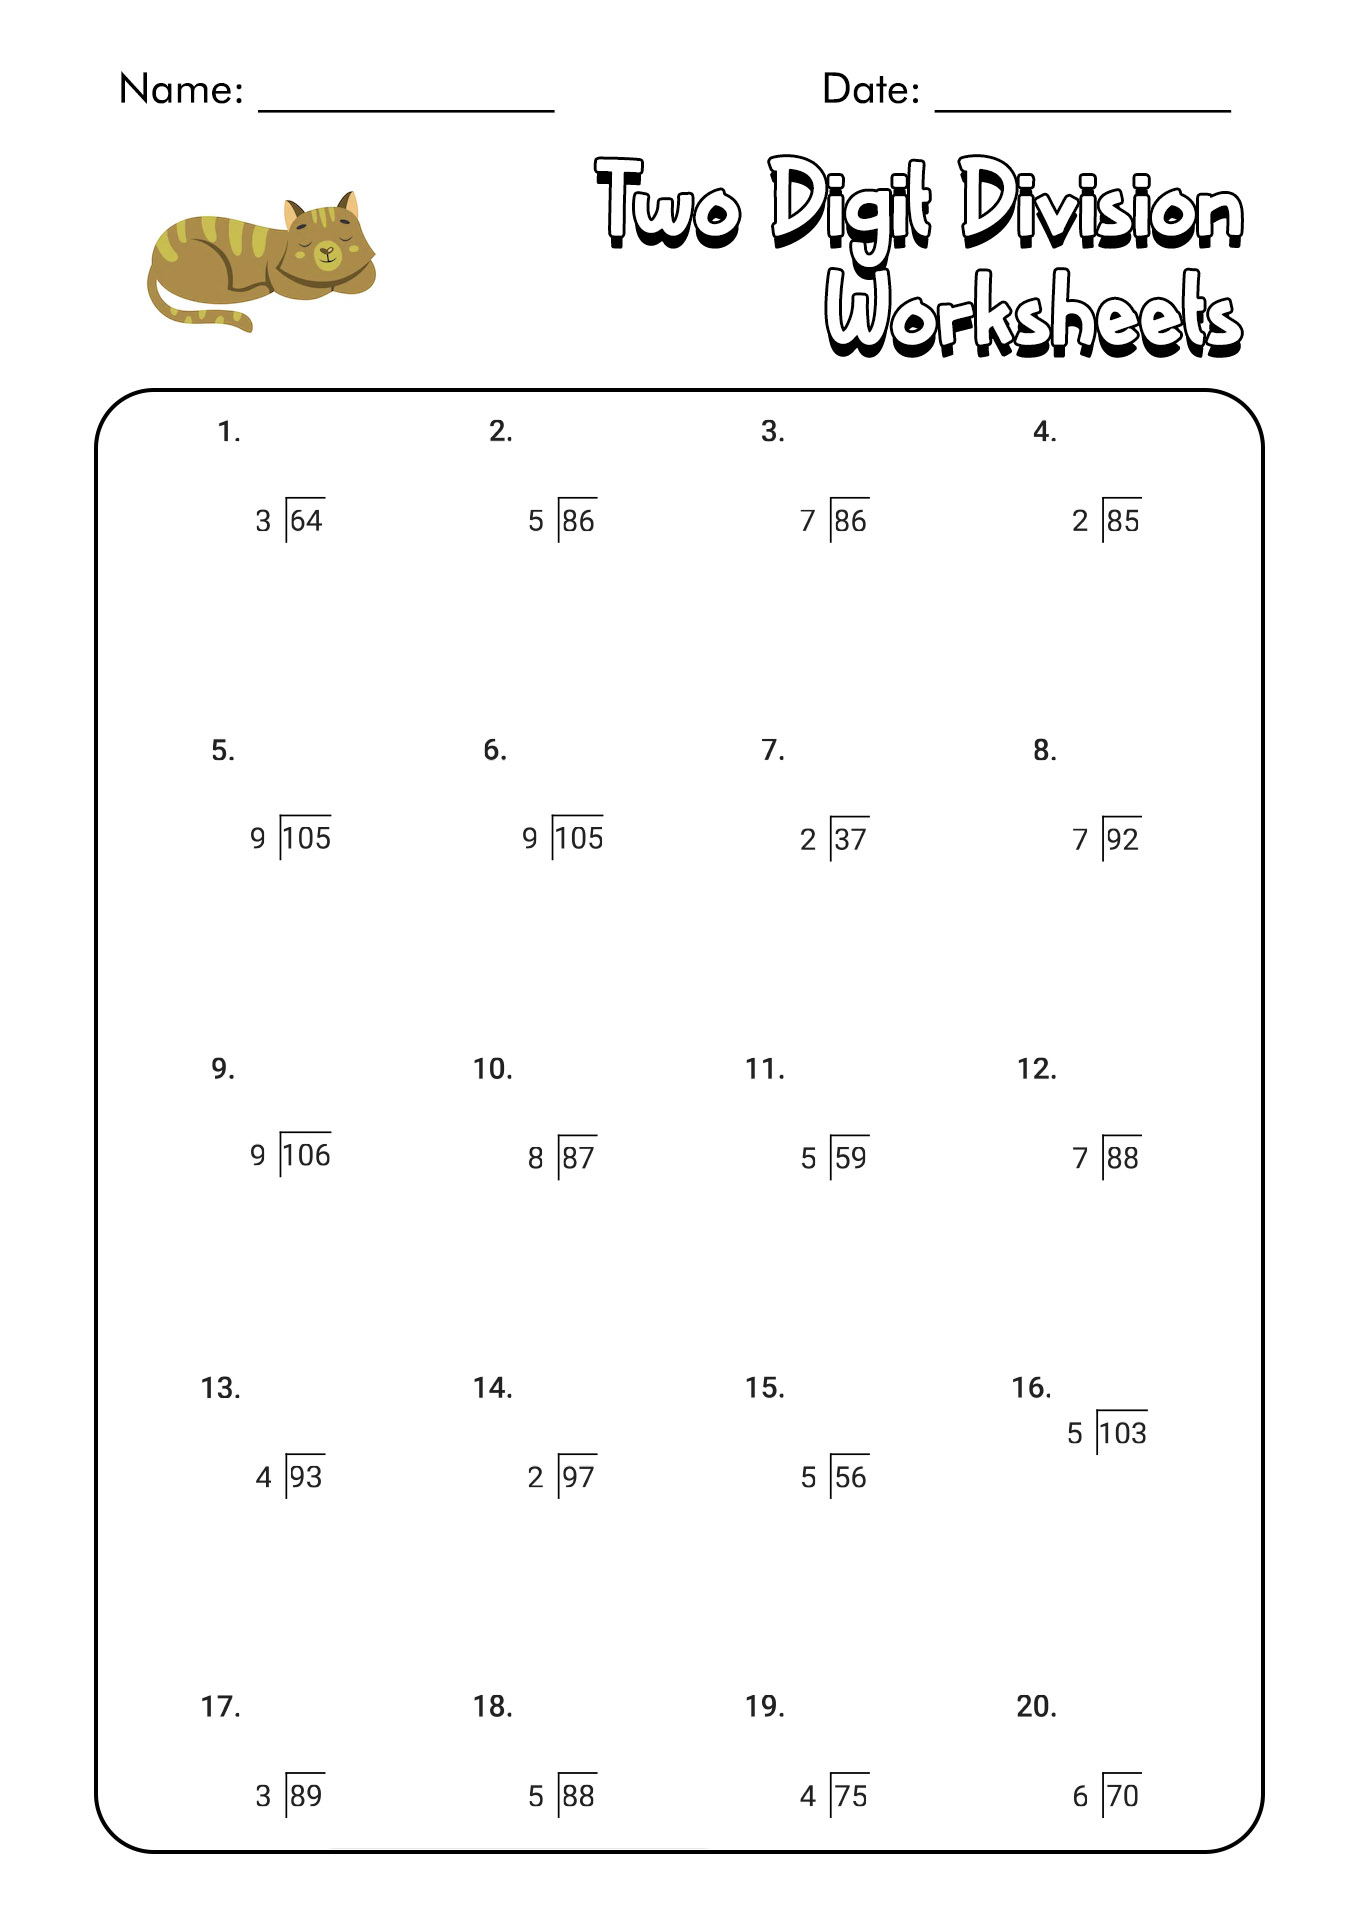 13-best-images-of-division-by-2-and-3-worksheets-divide-by-2-worksheets-3-by-2-digit-division